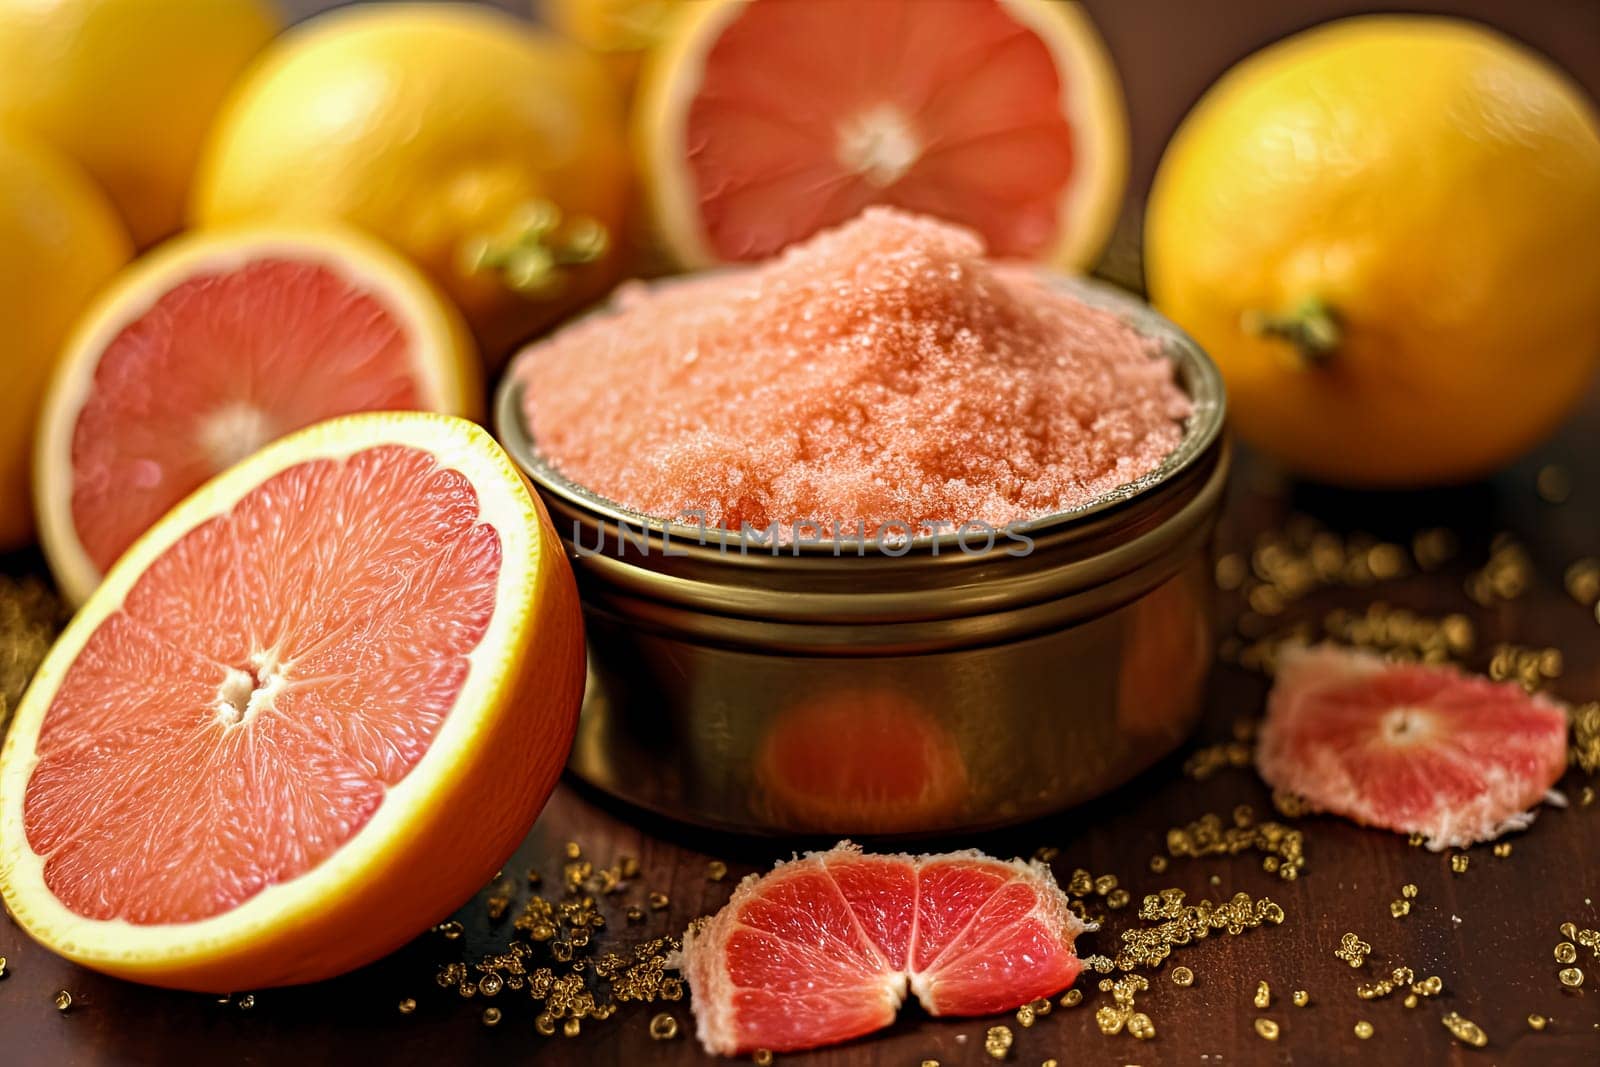 A glass jar with grapefruit salt scrub for the body, a concept of body care cosmetics. Sliced grapefruit rounds are placed around it.